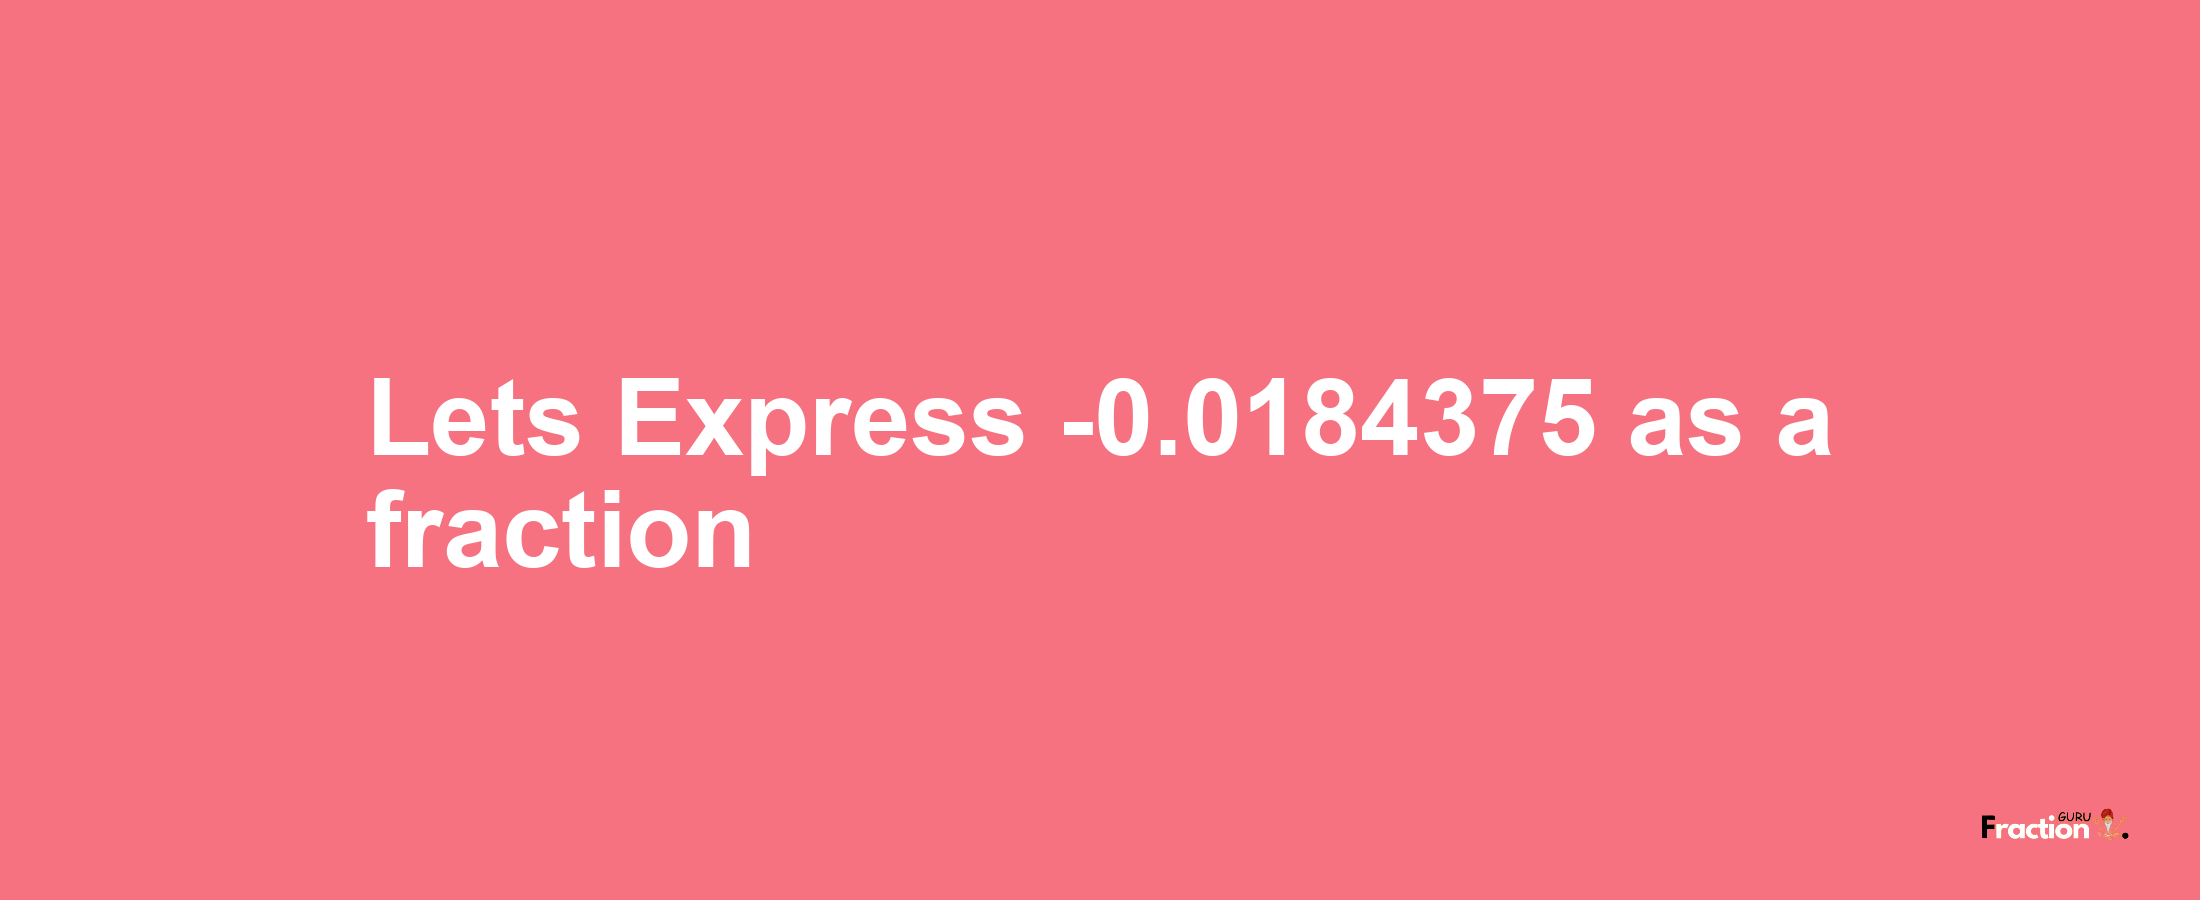 Lets Express -0.0184375 as afraction